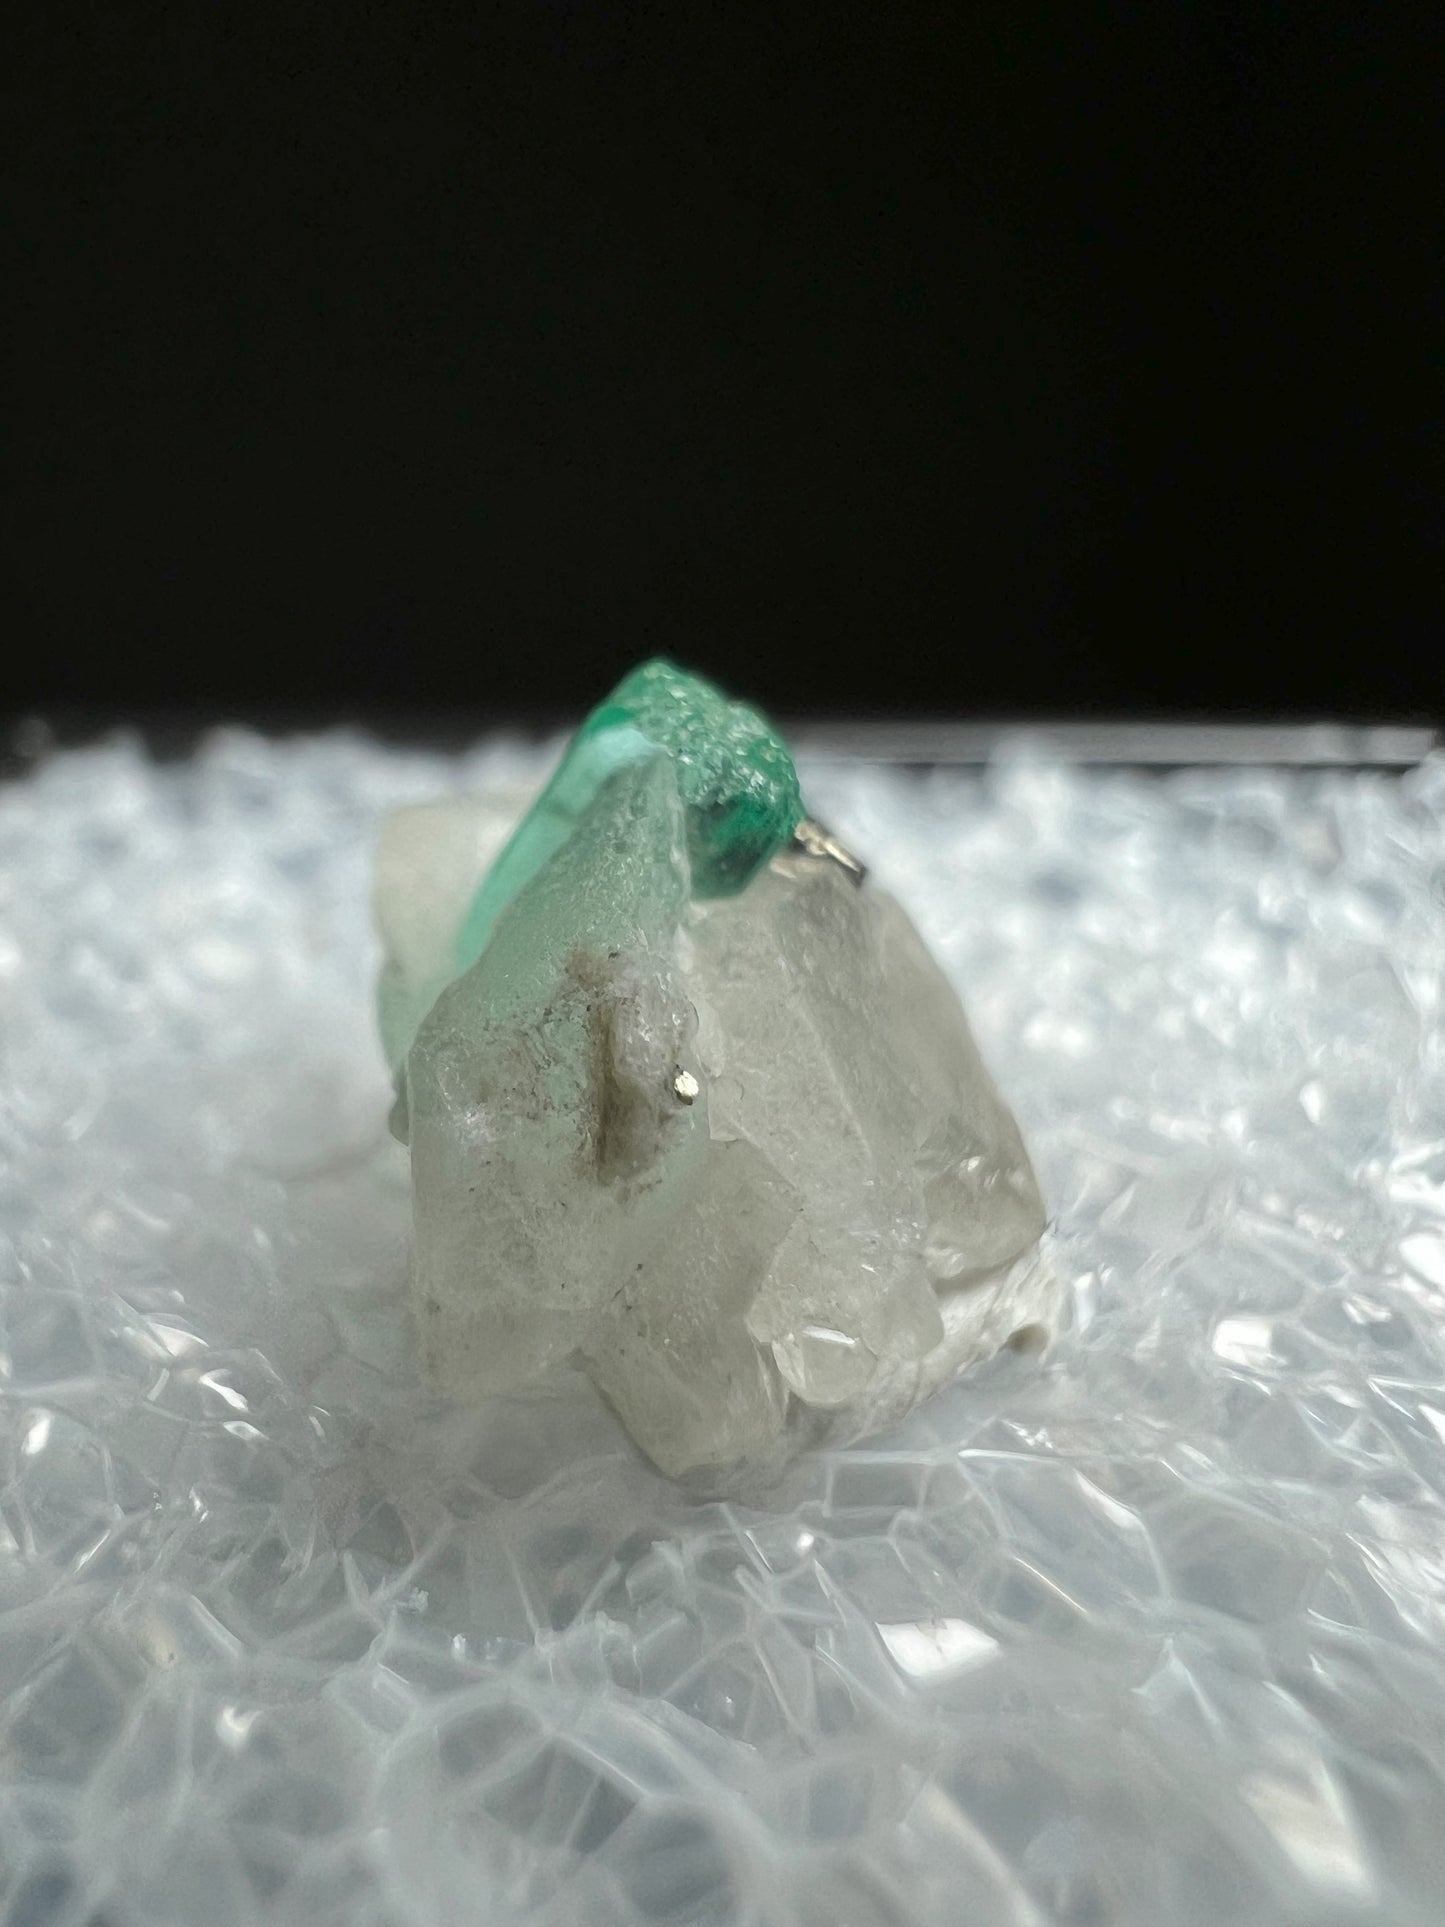 Terminated Emerald In Calcite With Pyrite From Panjshir, Afghanistan- collectors piece, Gift, Crystal